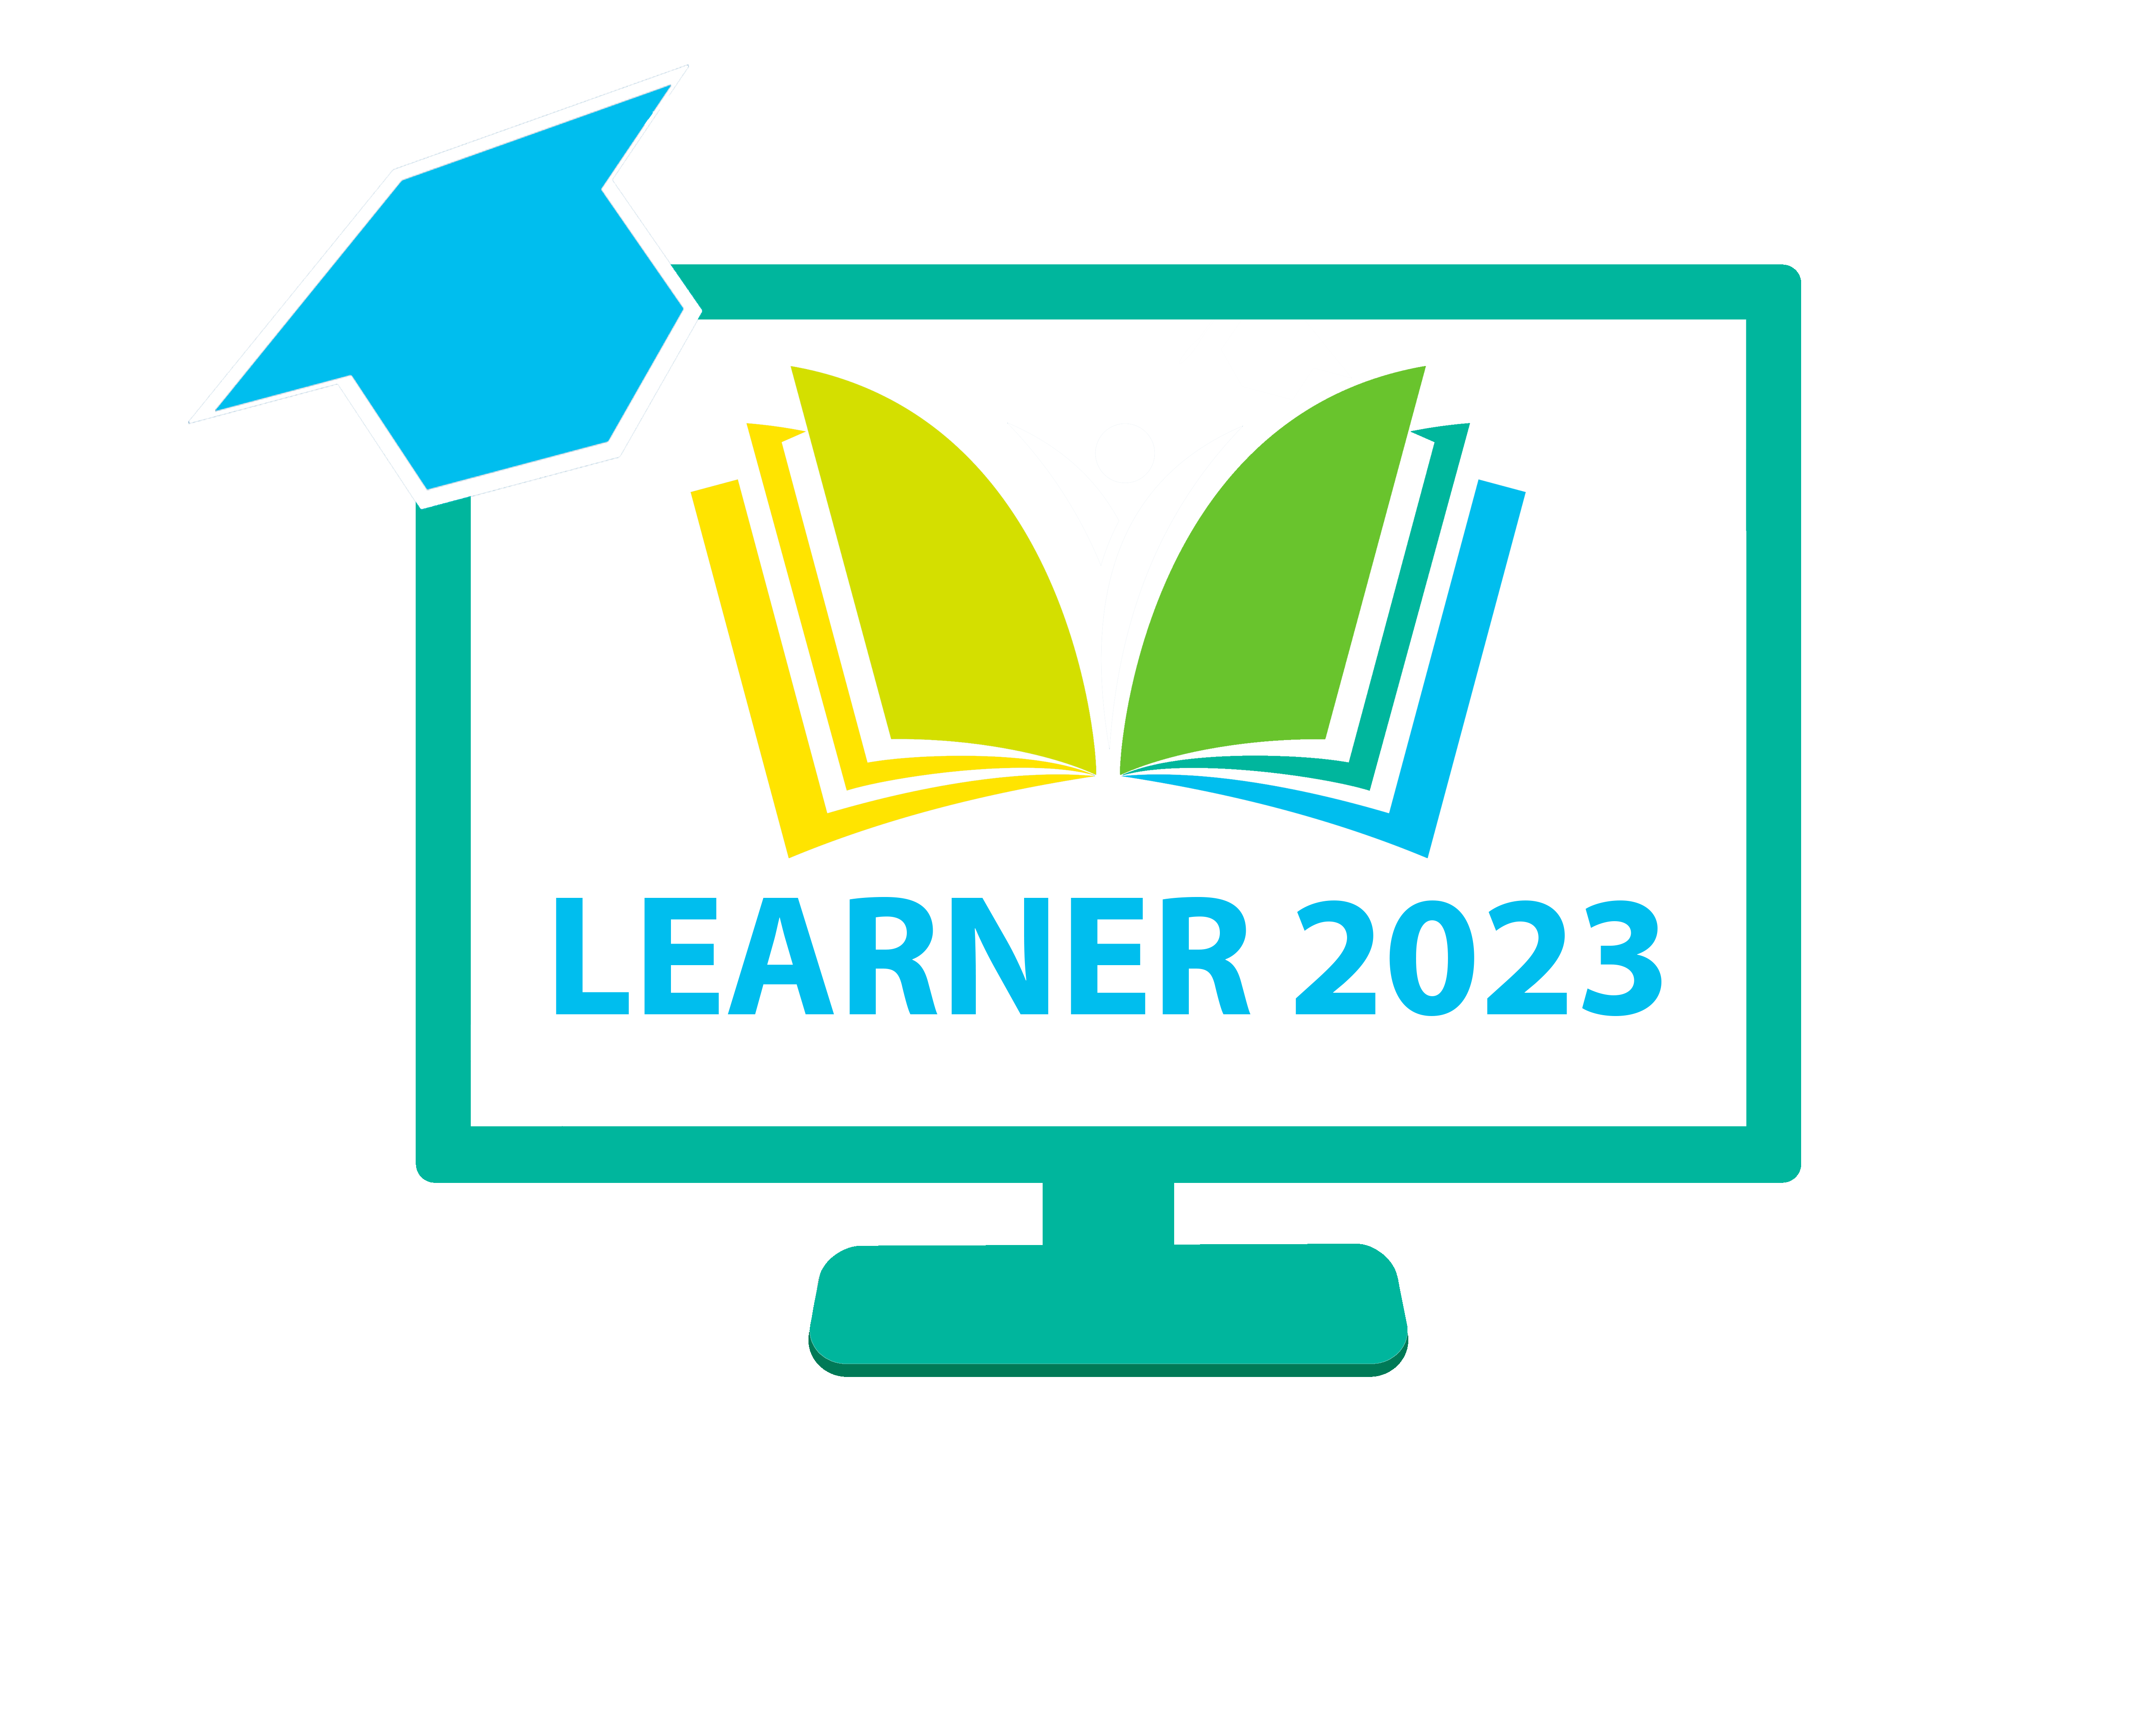 LEARNER Workshop co-located with EASE 2023